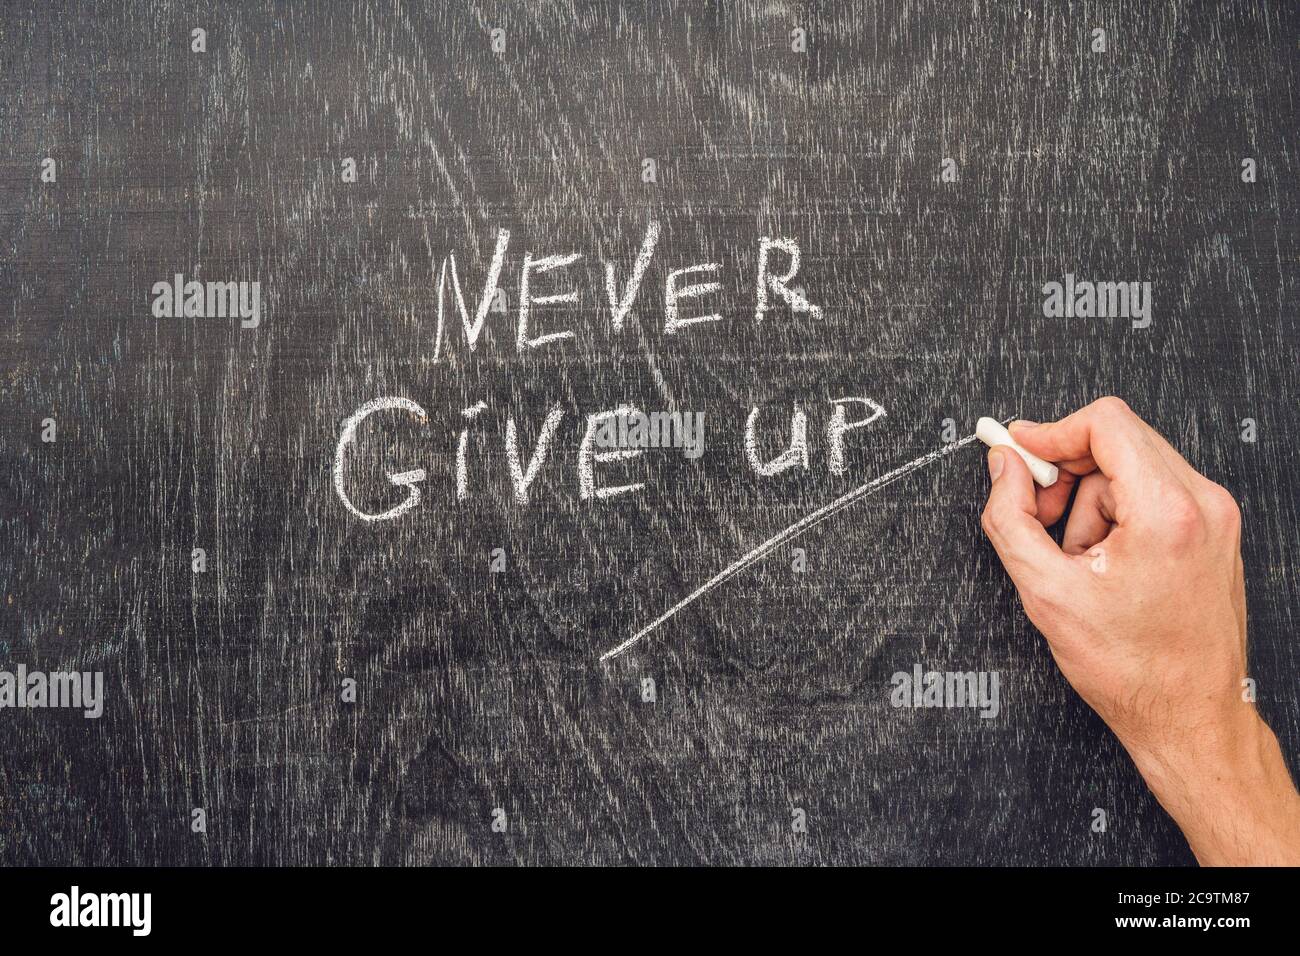 Never give up words written on the chalkboard Stock Photo